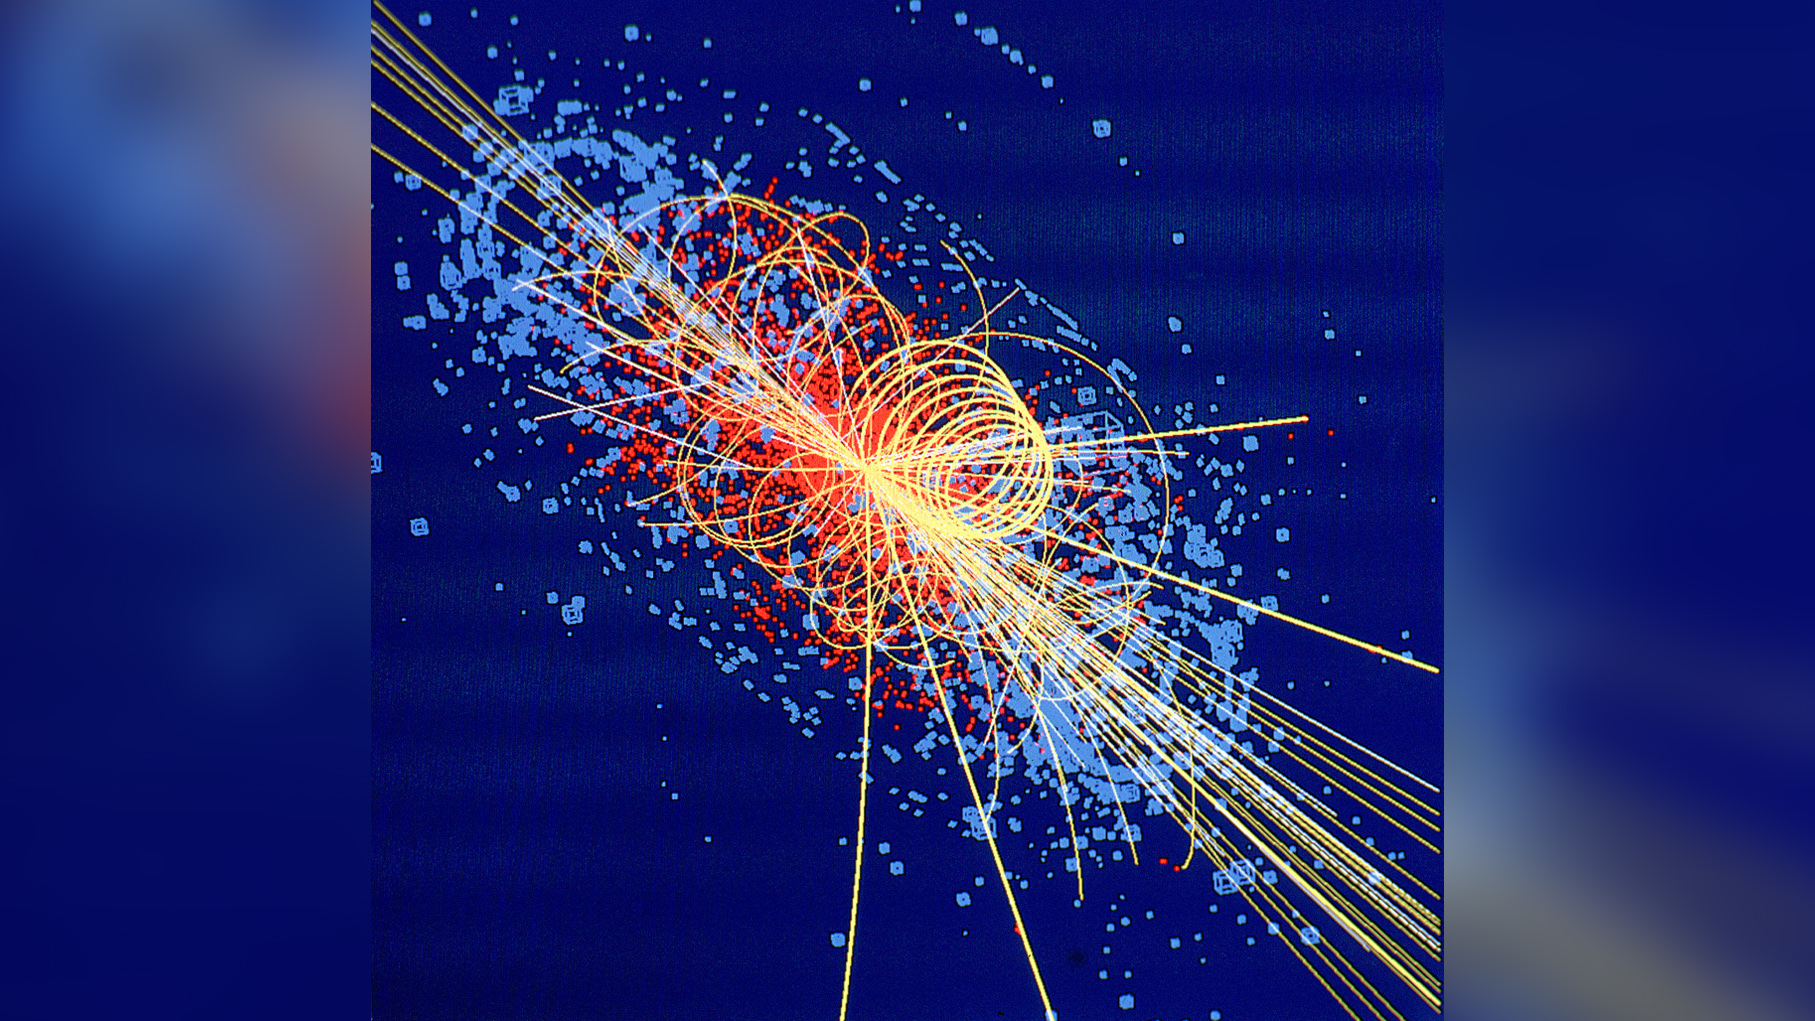 This trace is an example of simulated data modeled for the CMS detector on the Large Hadron Collider (LHC) at CERN, which began collecting data in 2008.